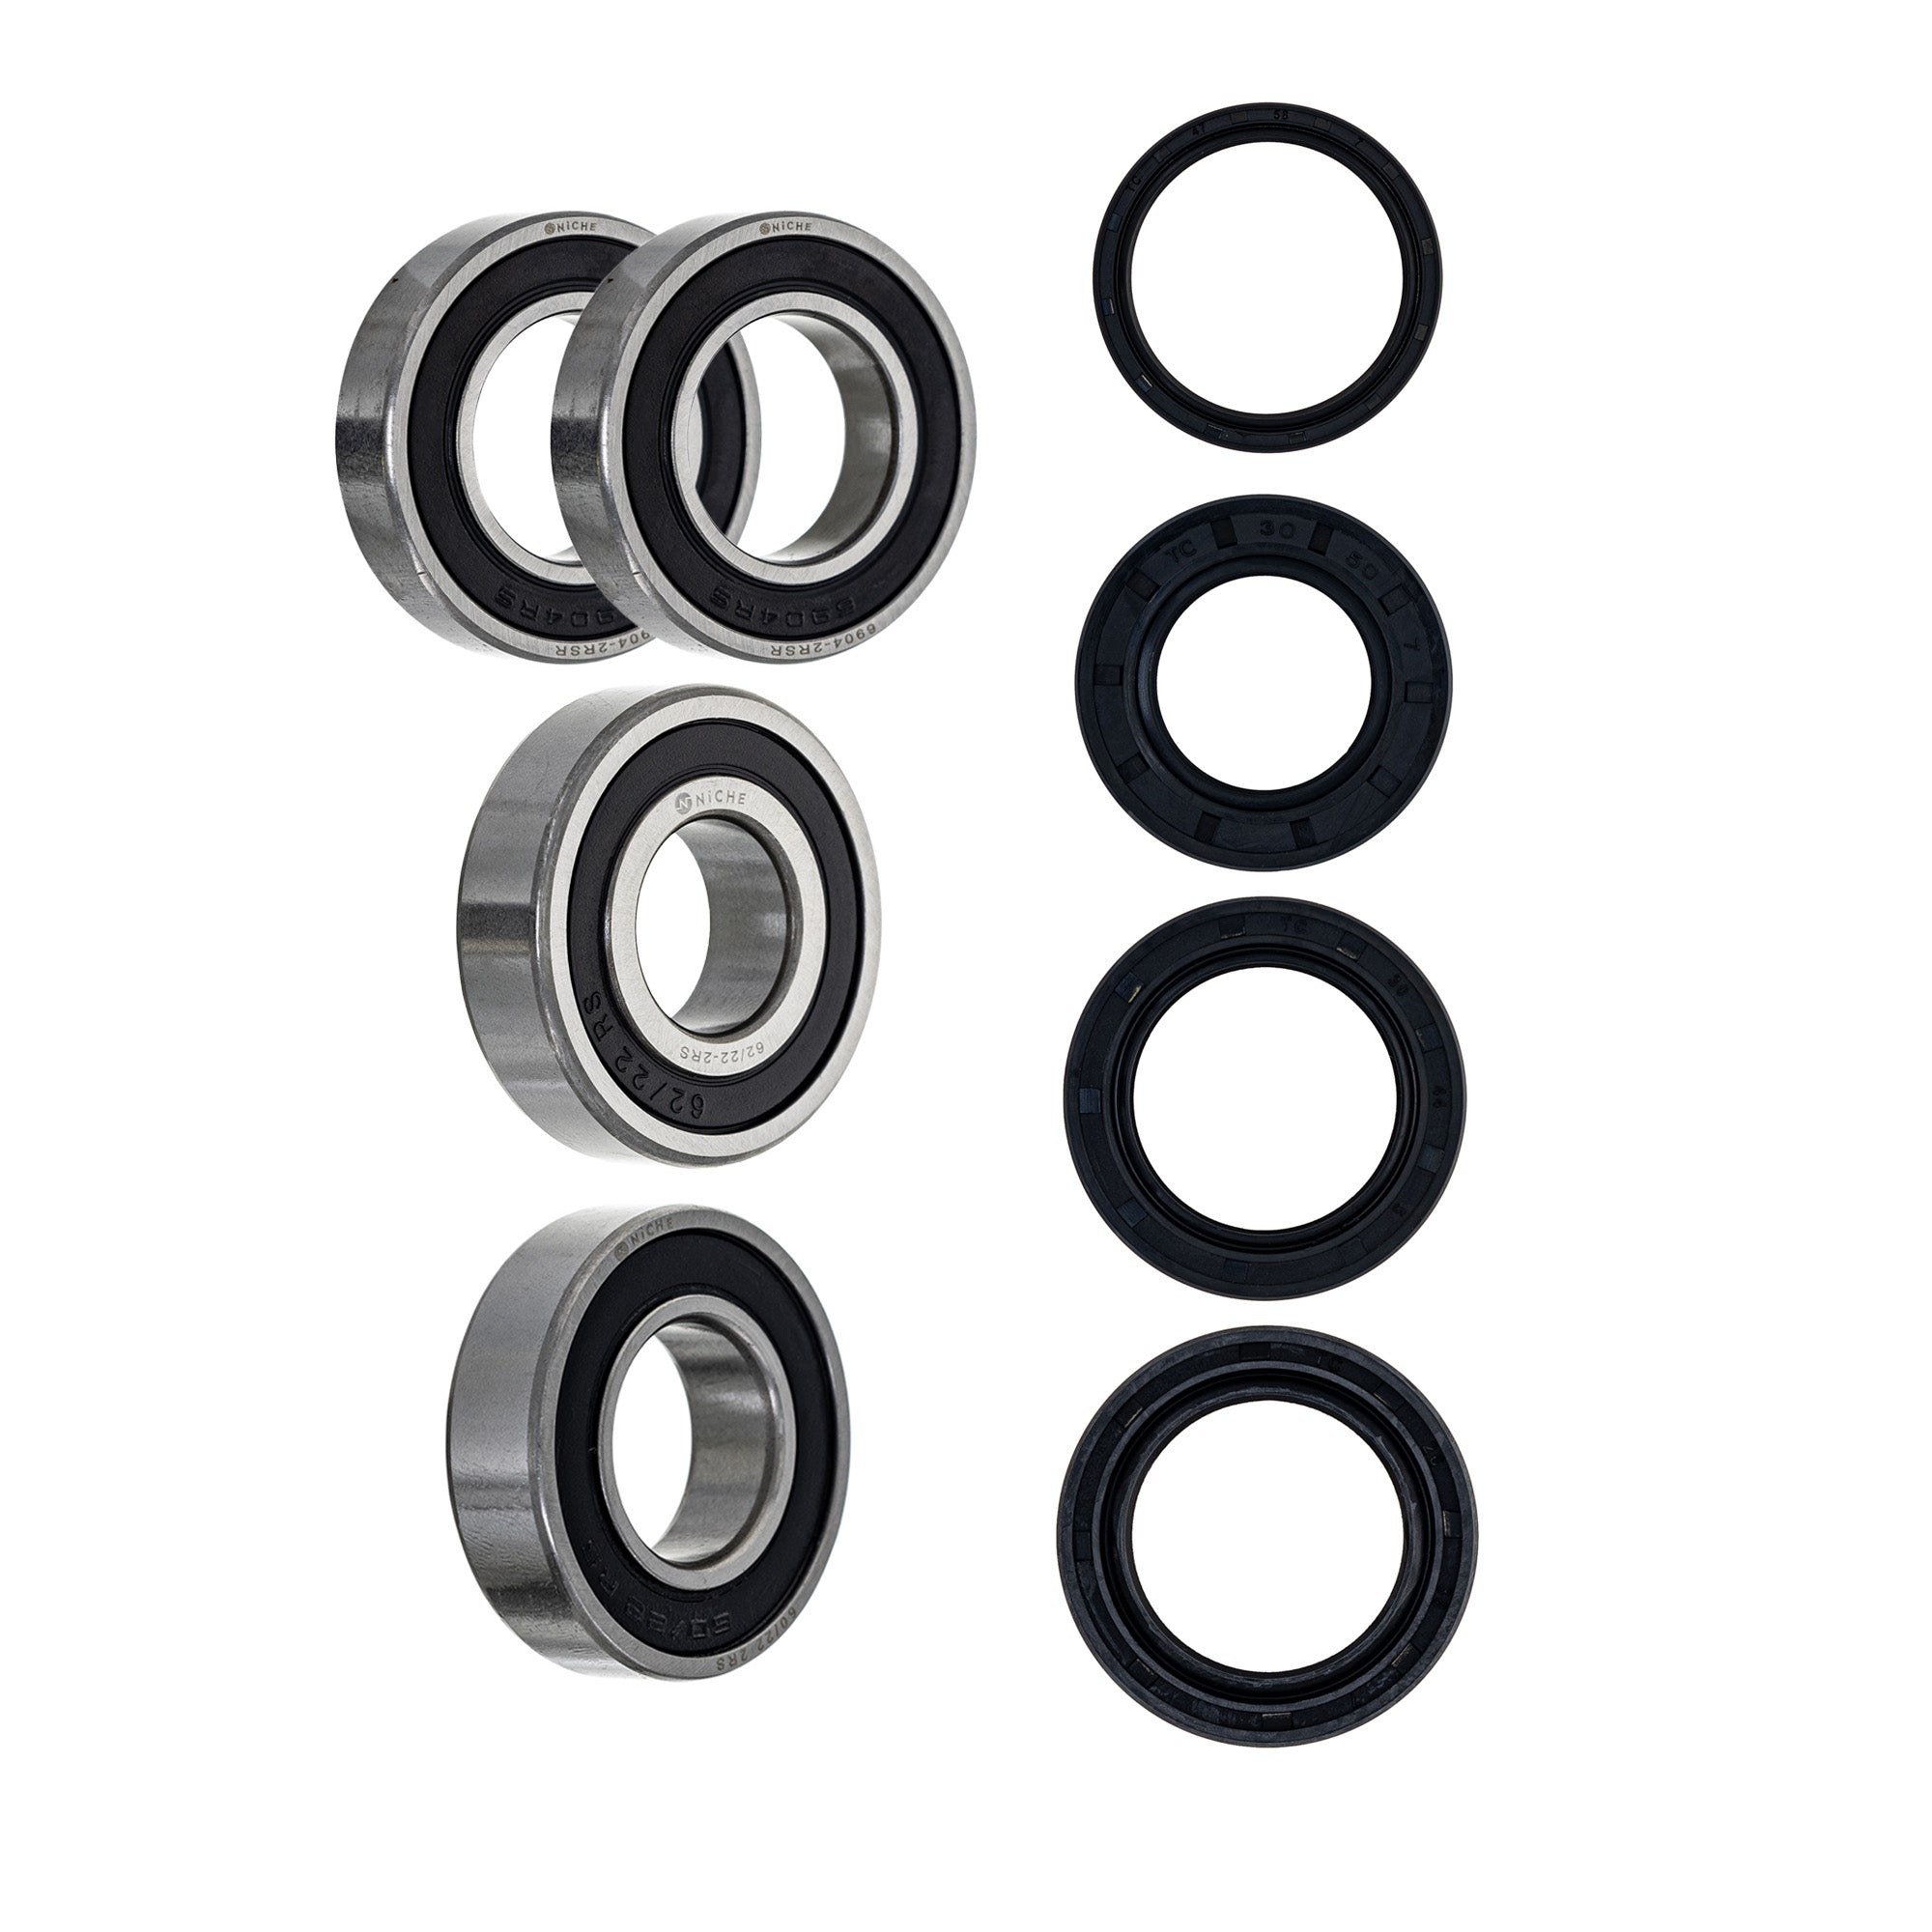 Wheel Bearing Seal Kit for zOTHER WR450F WR426F WR400F WR250F NICHE MK1008717